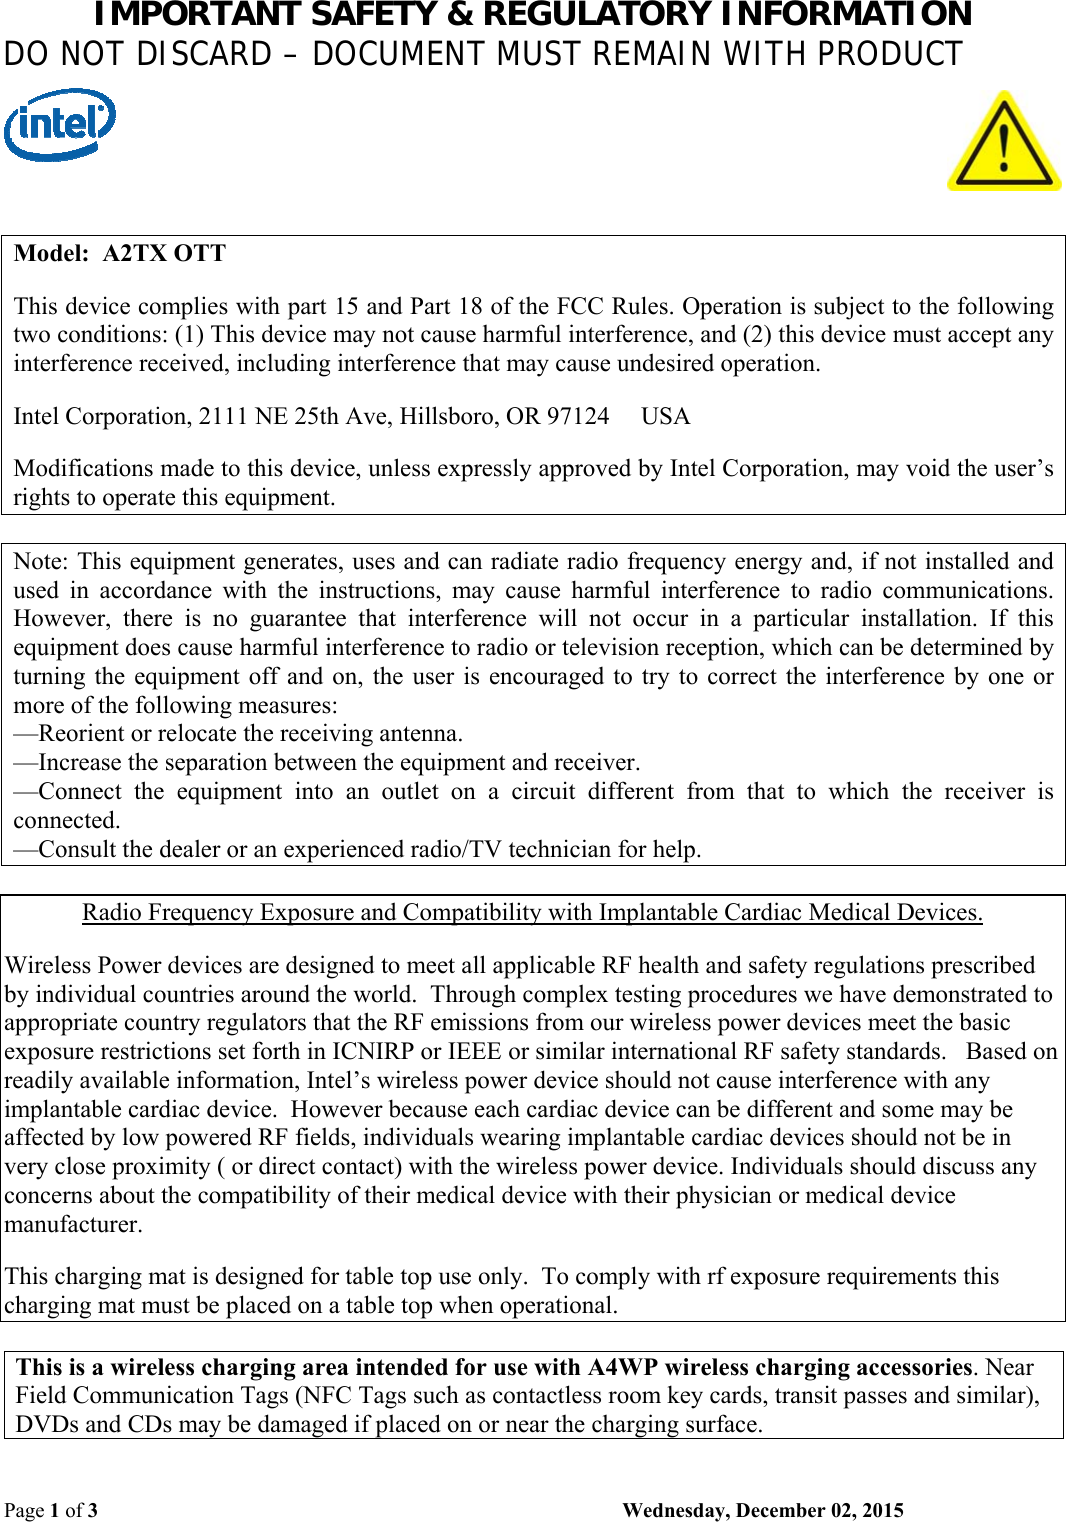 IMPORTANT SAFETY &amp; REGULATORY INFORMATION DO NOT DISCARD – DOCUMENT MUST REMAIN WITH PRODUCT Page 1 of 3    Wednesday, December 02, 2015  Model:  A2TX OTT  This device complies with part 15 and Part 18 of the FCC Rules. Operation is subject to the following two conditions: (1) This device may not cause harmful interference, and (2) this device must accept any interference received, including interference that may cause undesired operation.  Intel Corporation, 2111 NE 25th Ave, Hillsboro, OR 97124     USA  Modifications made to this device, unless expressly approved by Intel Corporation, may void the user’s rights to operate this equipment.  Note: This equipment generates, uses and can radiate radio frequency energy and, if not installed and used  in  accordance  with  the  instructions,  may  cause  harmful  interference  to  radio  communications. However,  there  is  no  guarantee  that  interference  will  not  occur  in  a  particular  installation.  If  this equipment does cause harmful interference to radio or television reception, which can be determined by turning the equipment off and  on,  the  user  is  encouraged to try to  correct  the  interference  by one  or more of the following measures: —Reorient or relocate the receiving antenna. —Increase the separation between the equipment and receiver. —Connect  the  equipment  into  an  outlet  on  a  circuit  different  from  that  to  which  the  receiver  is connected. —Consult the dealer or an experienced radio/TV technician for help.  Radio Frequency Exposure and Compatibility with Implantable Cardiac Medical Devices.  Wireless Power devices are designed to meet all applicable RF health and safety regulations prescribed by individual countries around the world.  Through complex testing procedures we have demonstrated to appropriate country regulators that the RF emissions from our wireless power devices meet the basic exposure restrictions set forth in ICNIRP or IEEE or similar international RF safety standards.   Based on readily available information, Intel’s wireless power device should not cause interference with any implantable cardiac device.  However because each cardiac device can be different and some may be affected by low powered RF fields, individuals wearing implantable cardiac devices should not be in very close proximity ( or direct contact) with the wireless power device. Individuals should discuss any concerns about the compatibility of their medical device with their physician or medical device manufacturer.    This charging mat is designed for table top use only.  To comply with rf exposure requirements this charging mat must be placed on a table top when operational.  This is a wireless charging area intended for use with A4WP wireless charging accessories. Near Field Communication Tags (NFC Tags such as contactless room key cards, transit passes and similar), DVDs and CDs may be damaged if placed on or near the charging surface. 